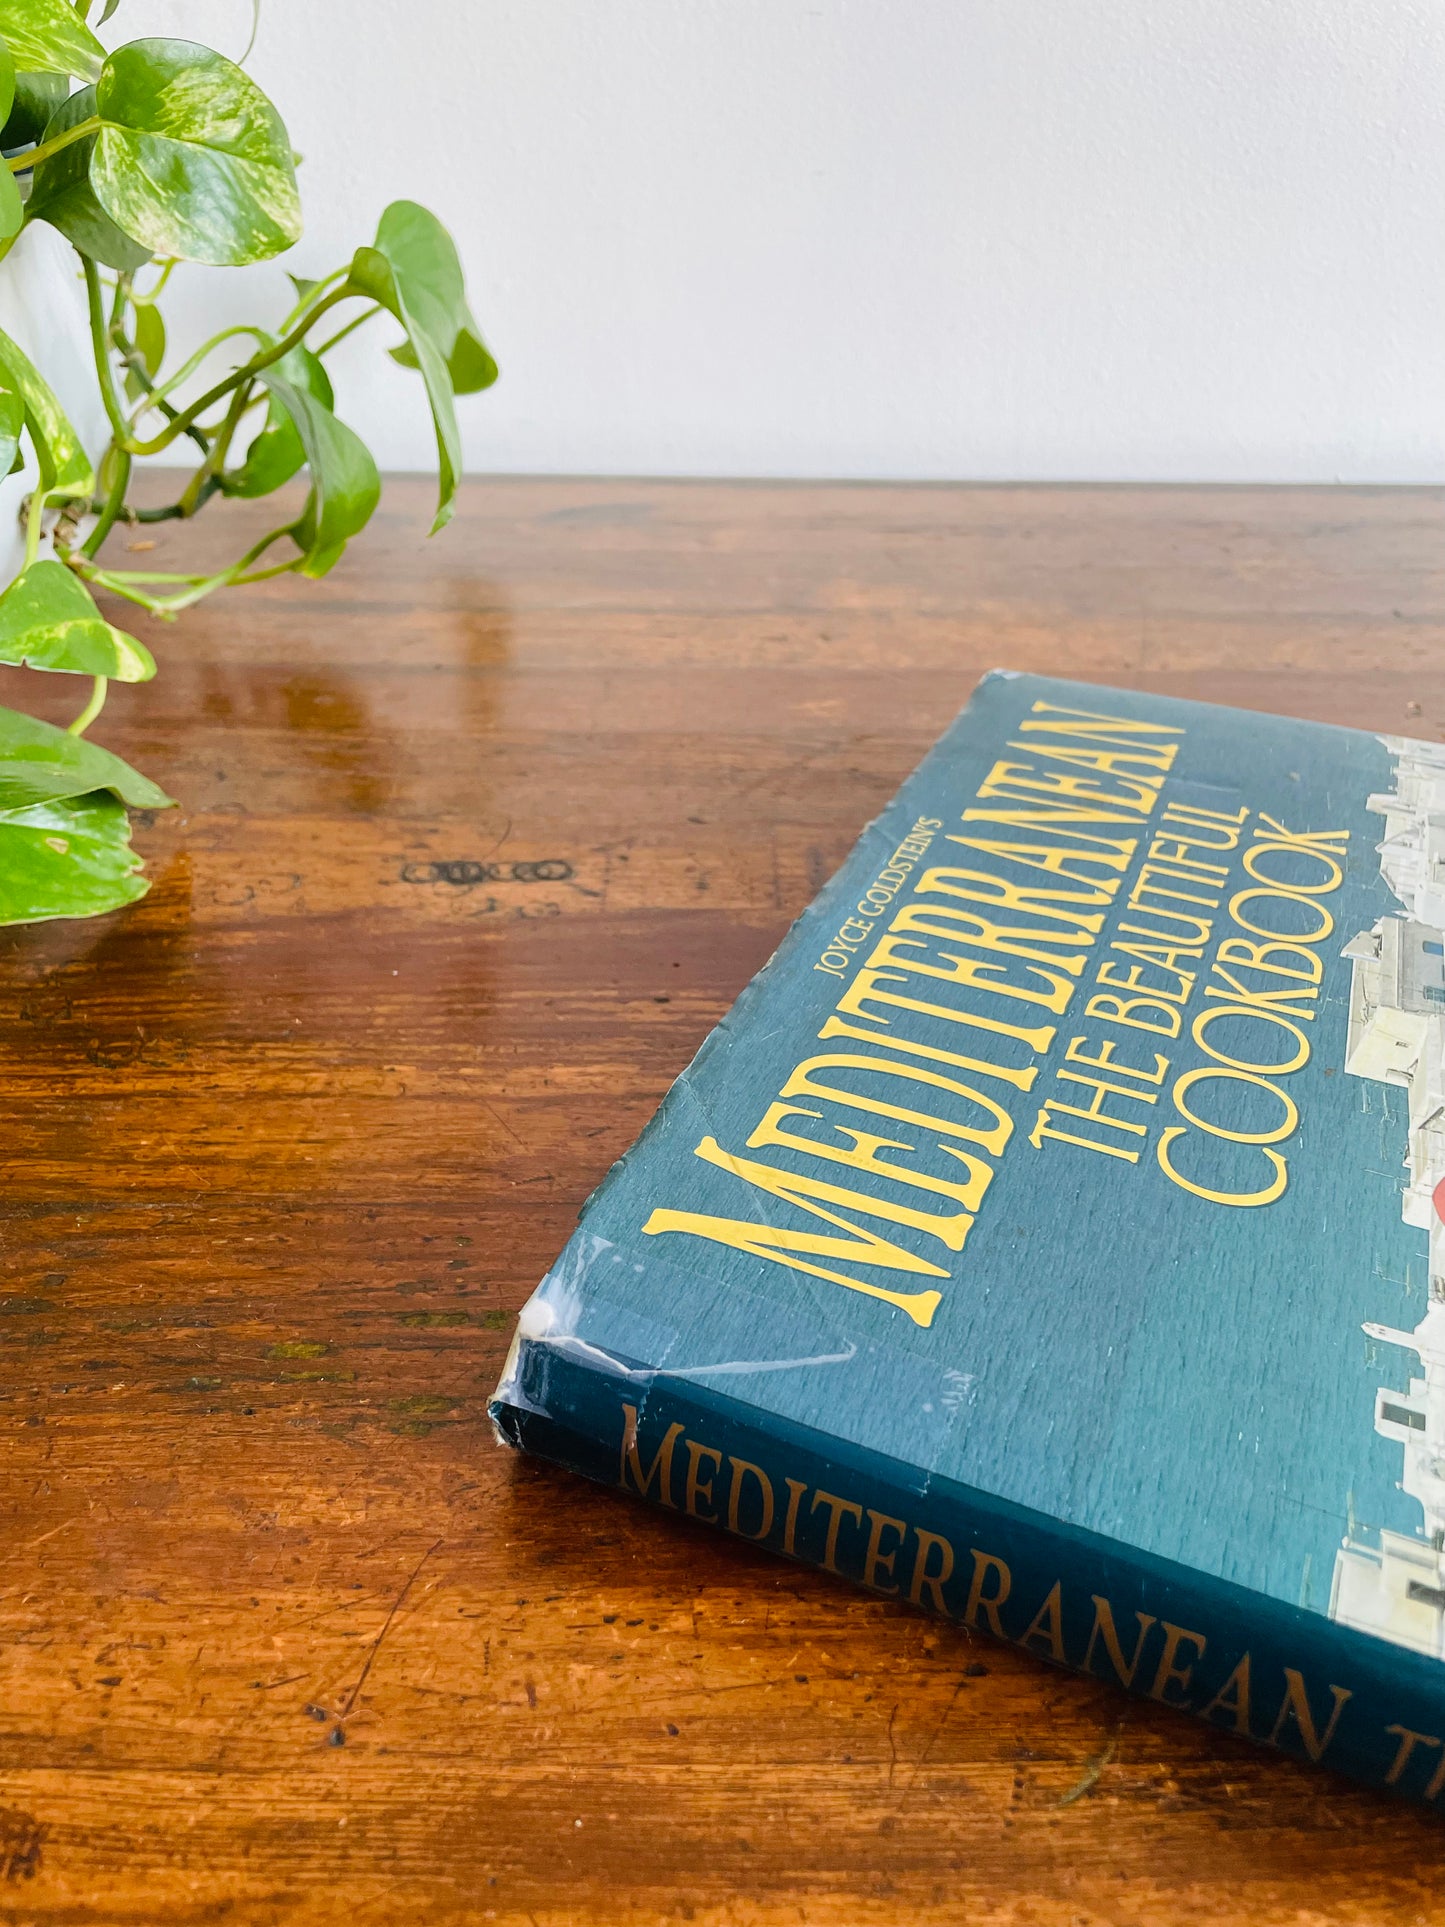 Joyce Goldstein's Mediterranean: The Beautiful Cookbook - Giant Hardcover Book with Photos (1994)